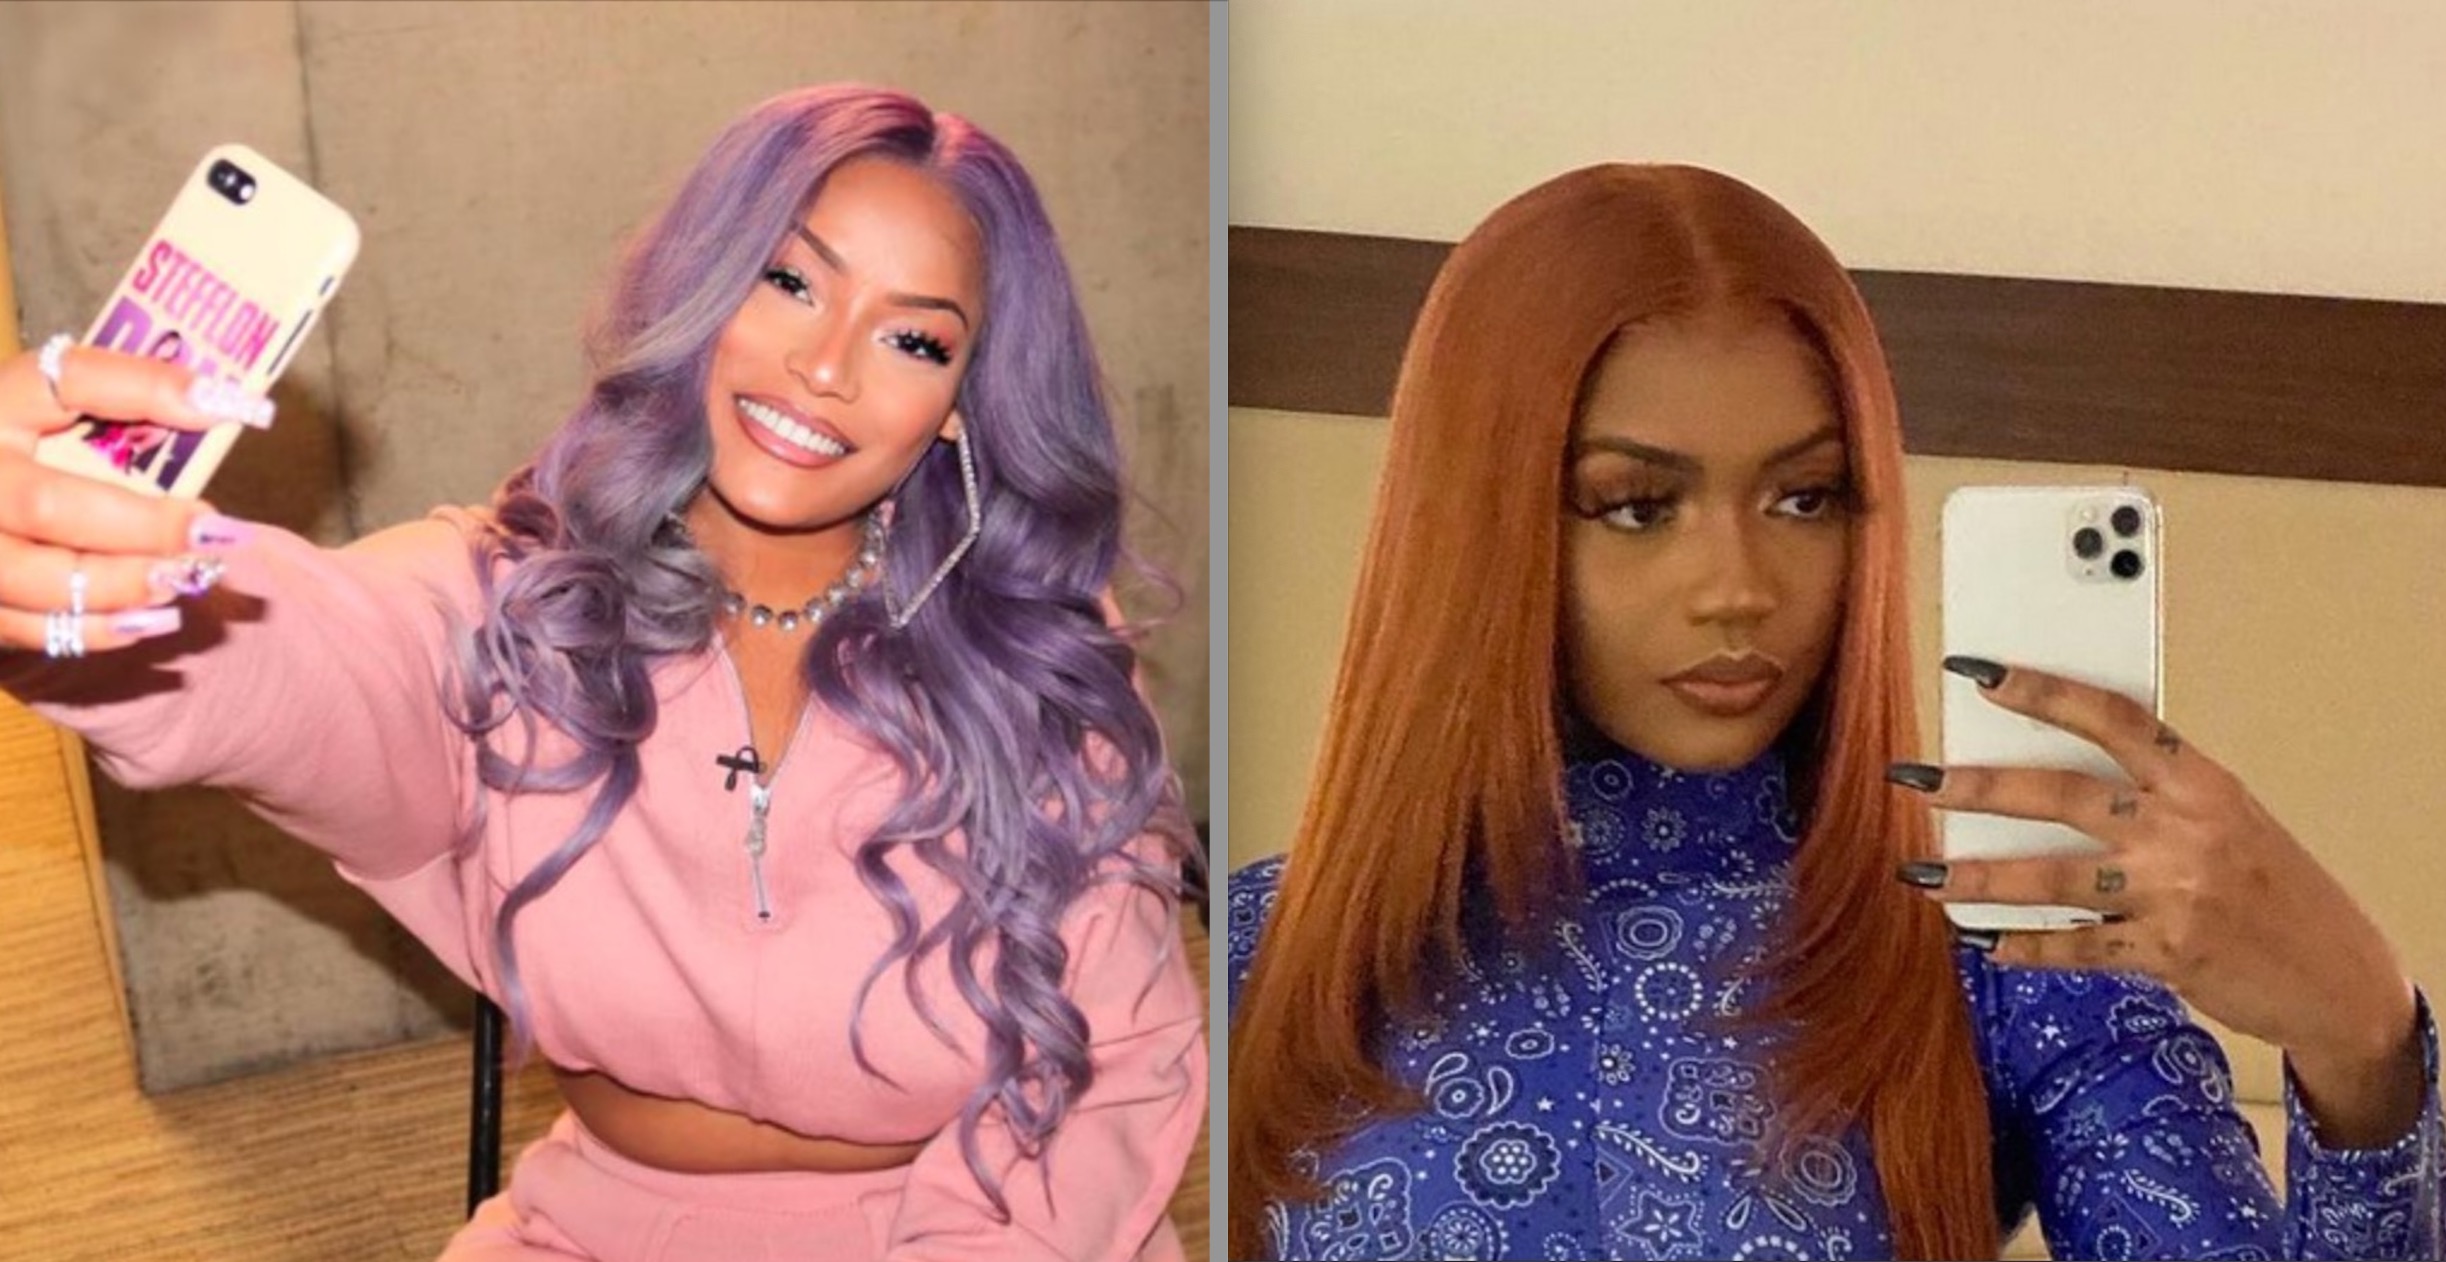 Stefflon Don and Jada Kingdom Leak Text Messages From Conversations They Had - See Posts